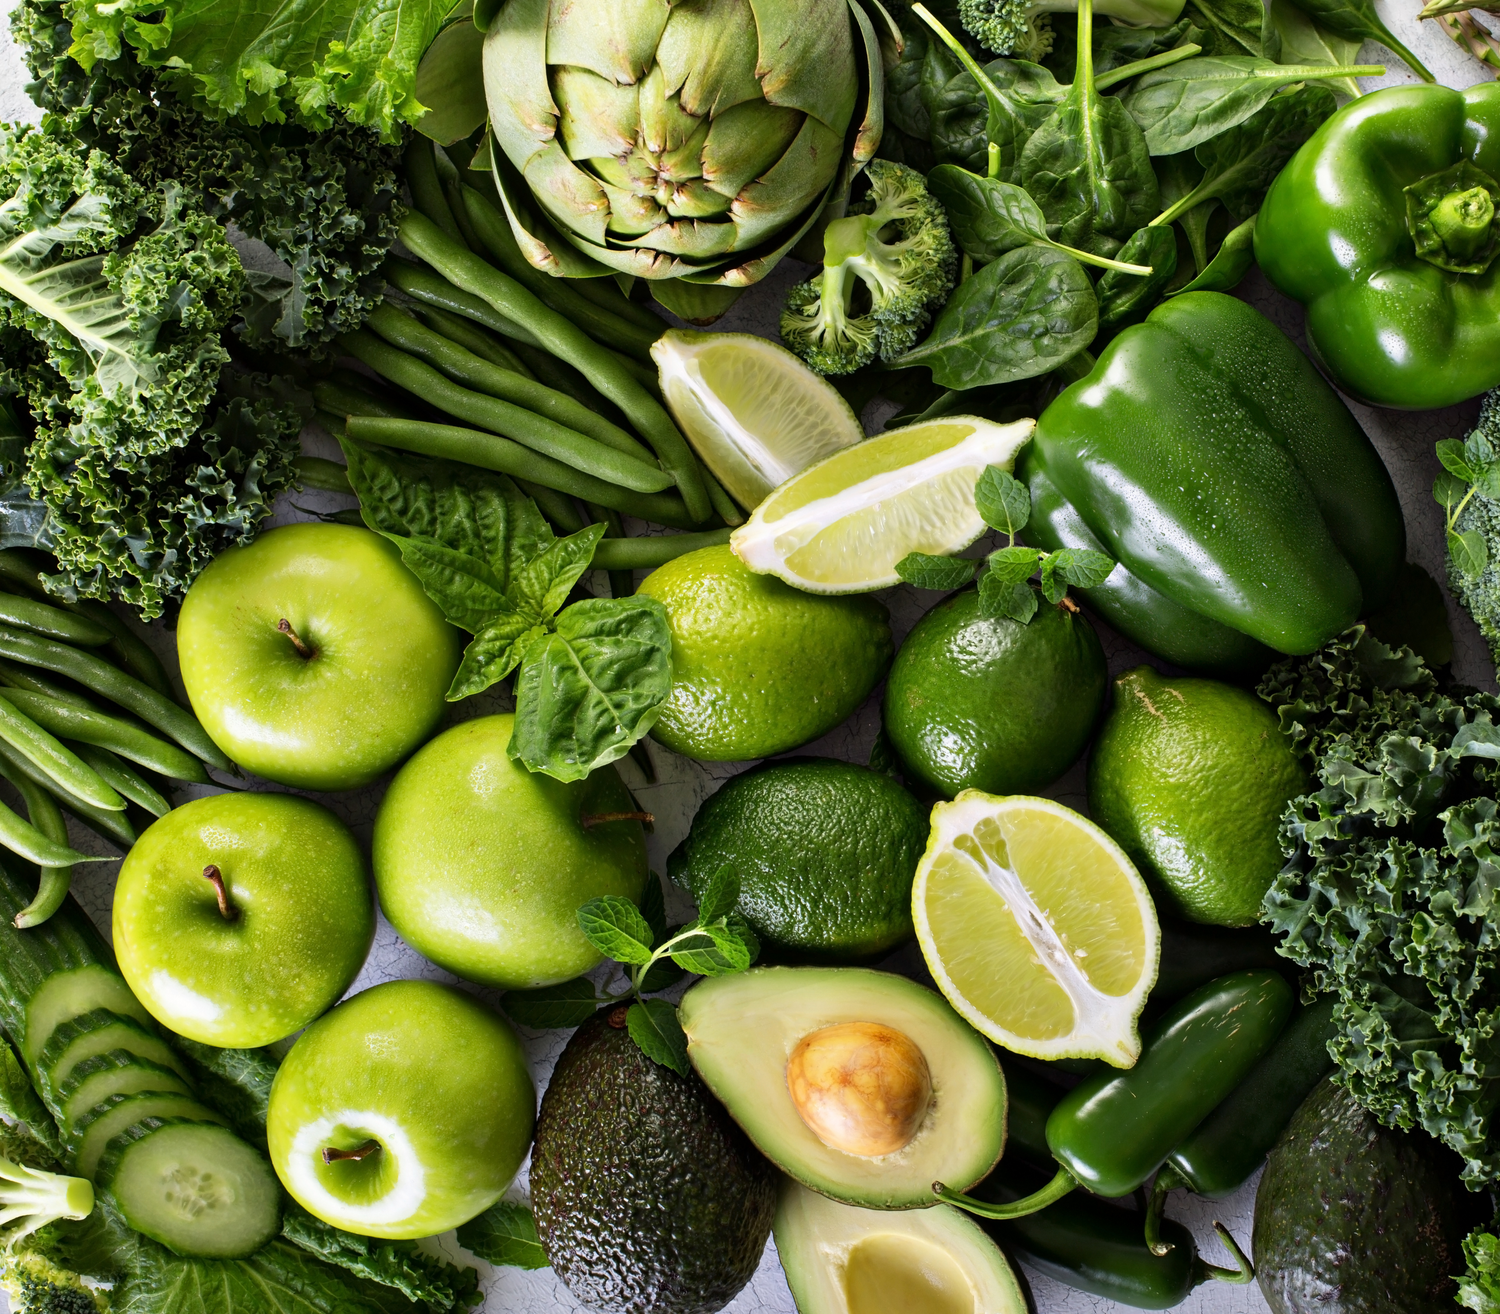 Greens Are Good for You. Here's Why (and How to Eat More)